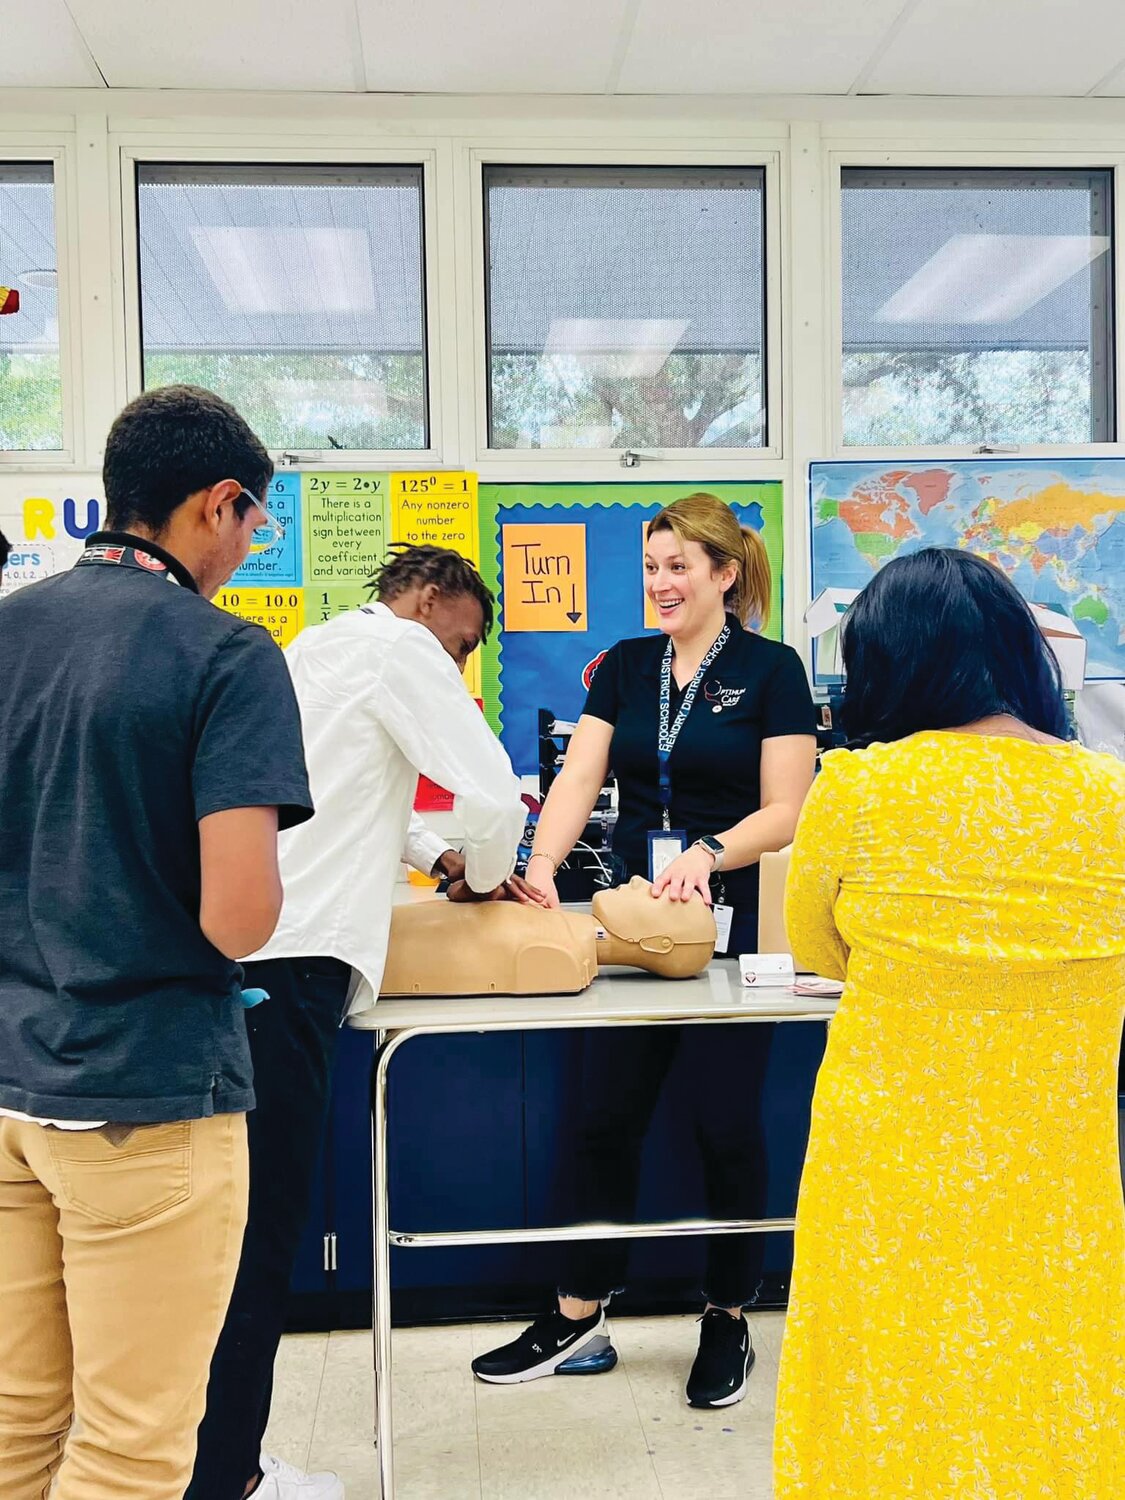 CLEWISTON - Optimum Care SWFL  Michelle Milian visited Clewiston Middle School for their 1st Career Day event on Feb. 16. Nurse Michelle had an awesome morning telling the 8th graders all about a career in nursing. [Photo courtesy CMS]